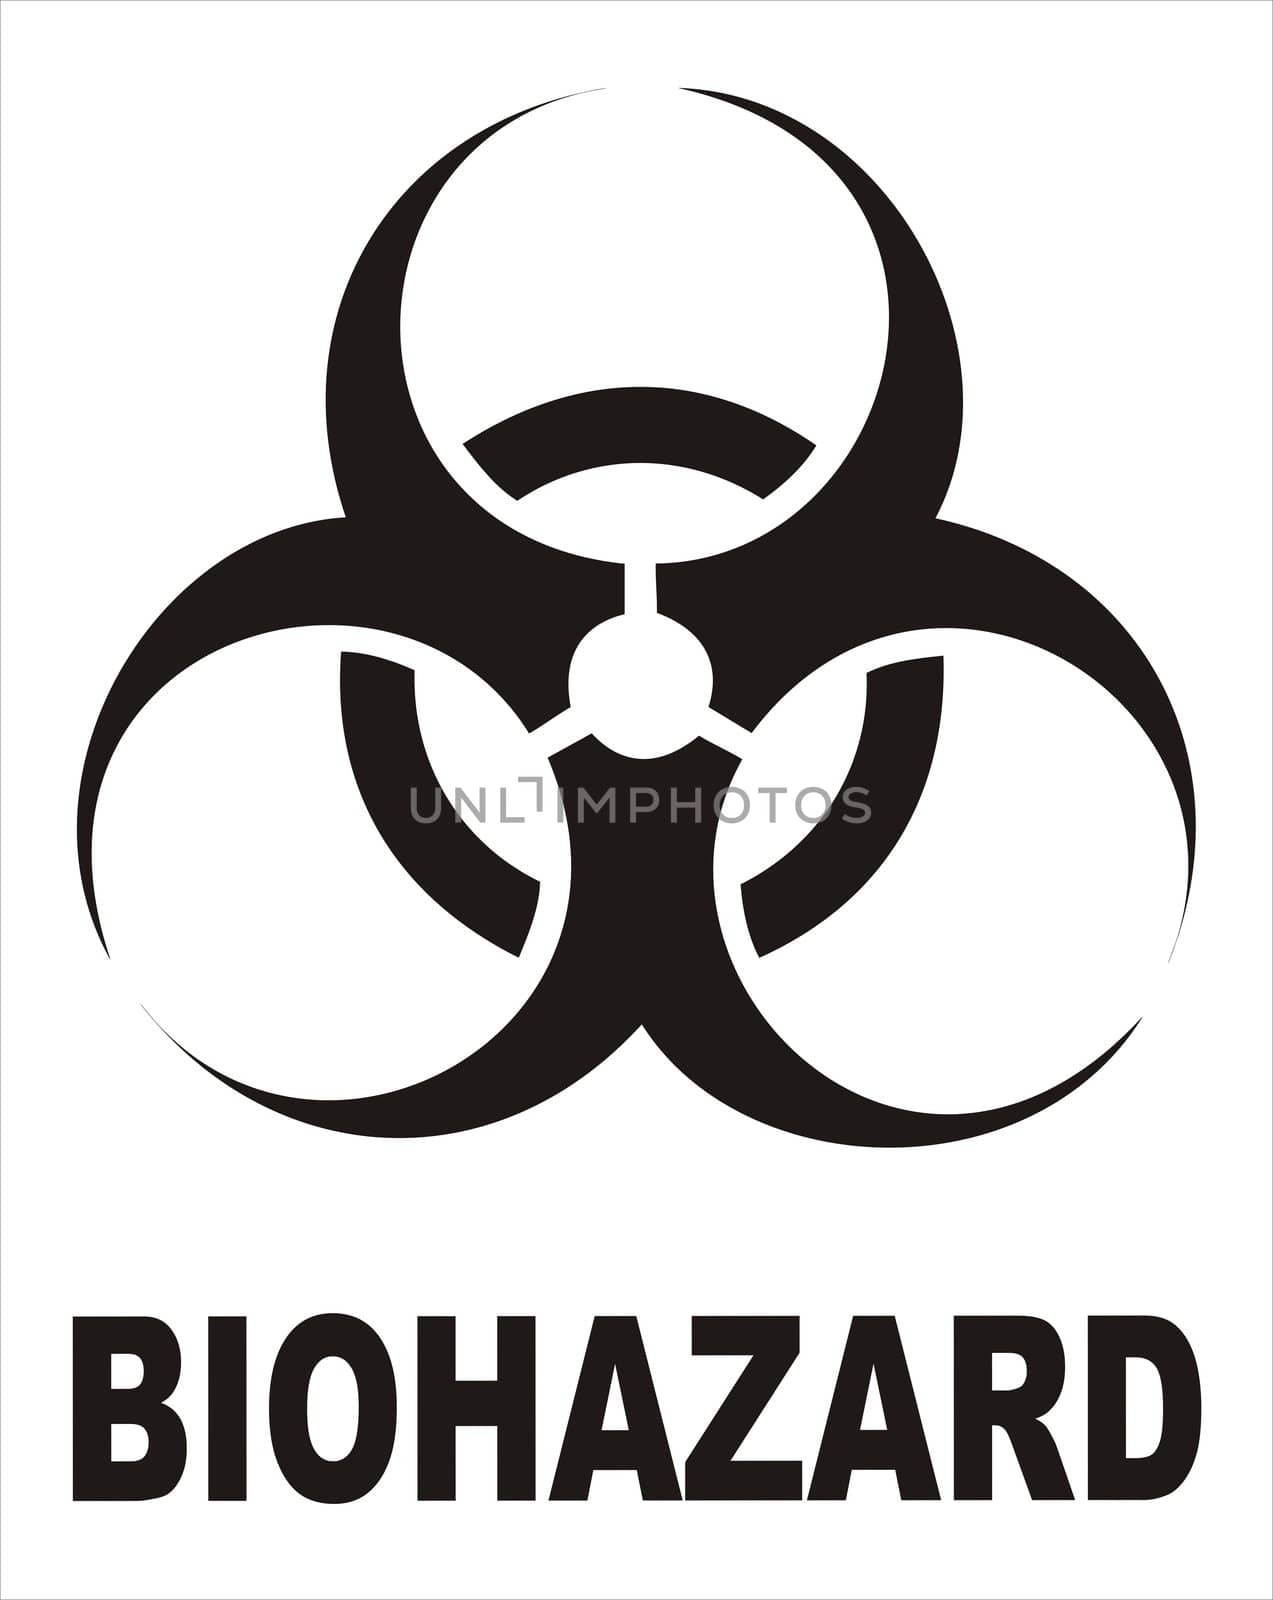 vectorial image biohazard warning color sign with white background